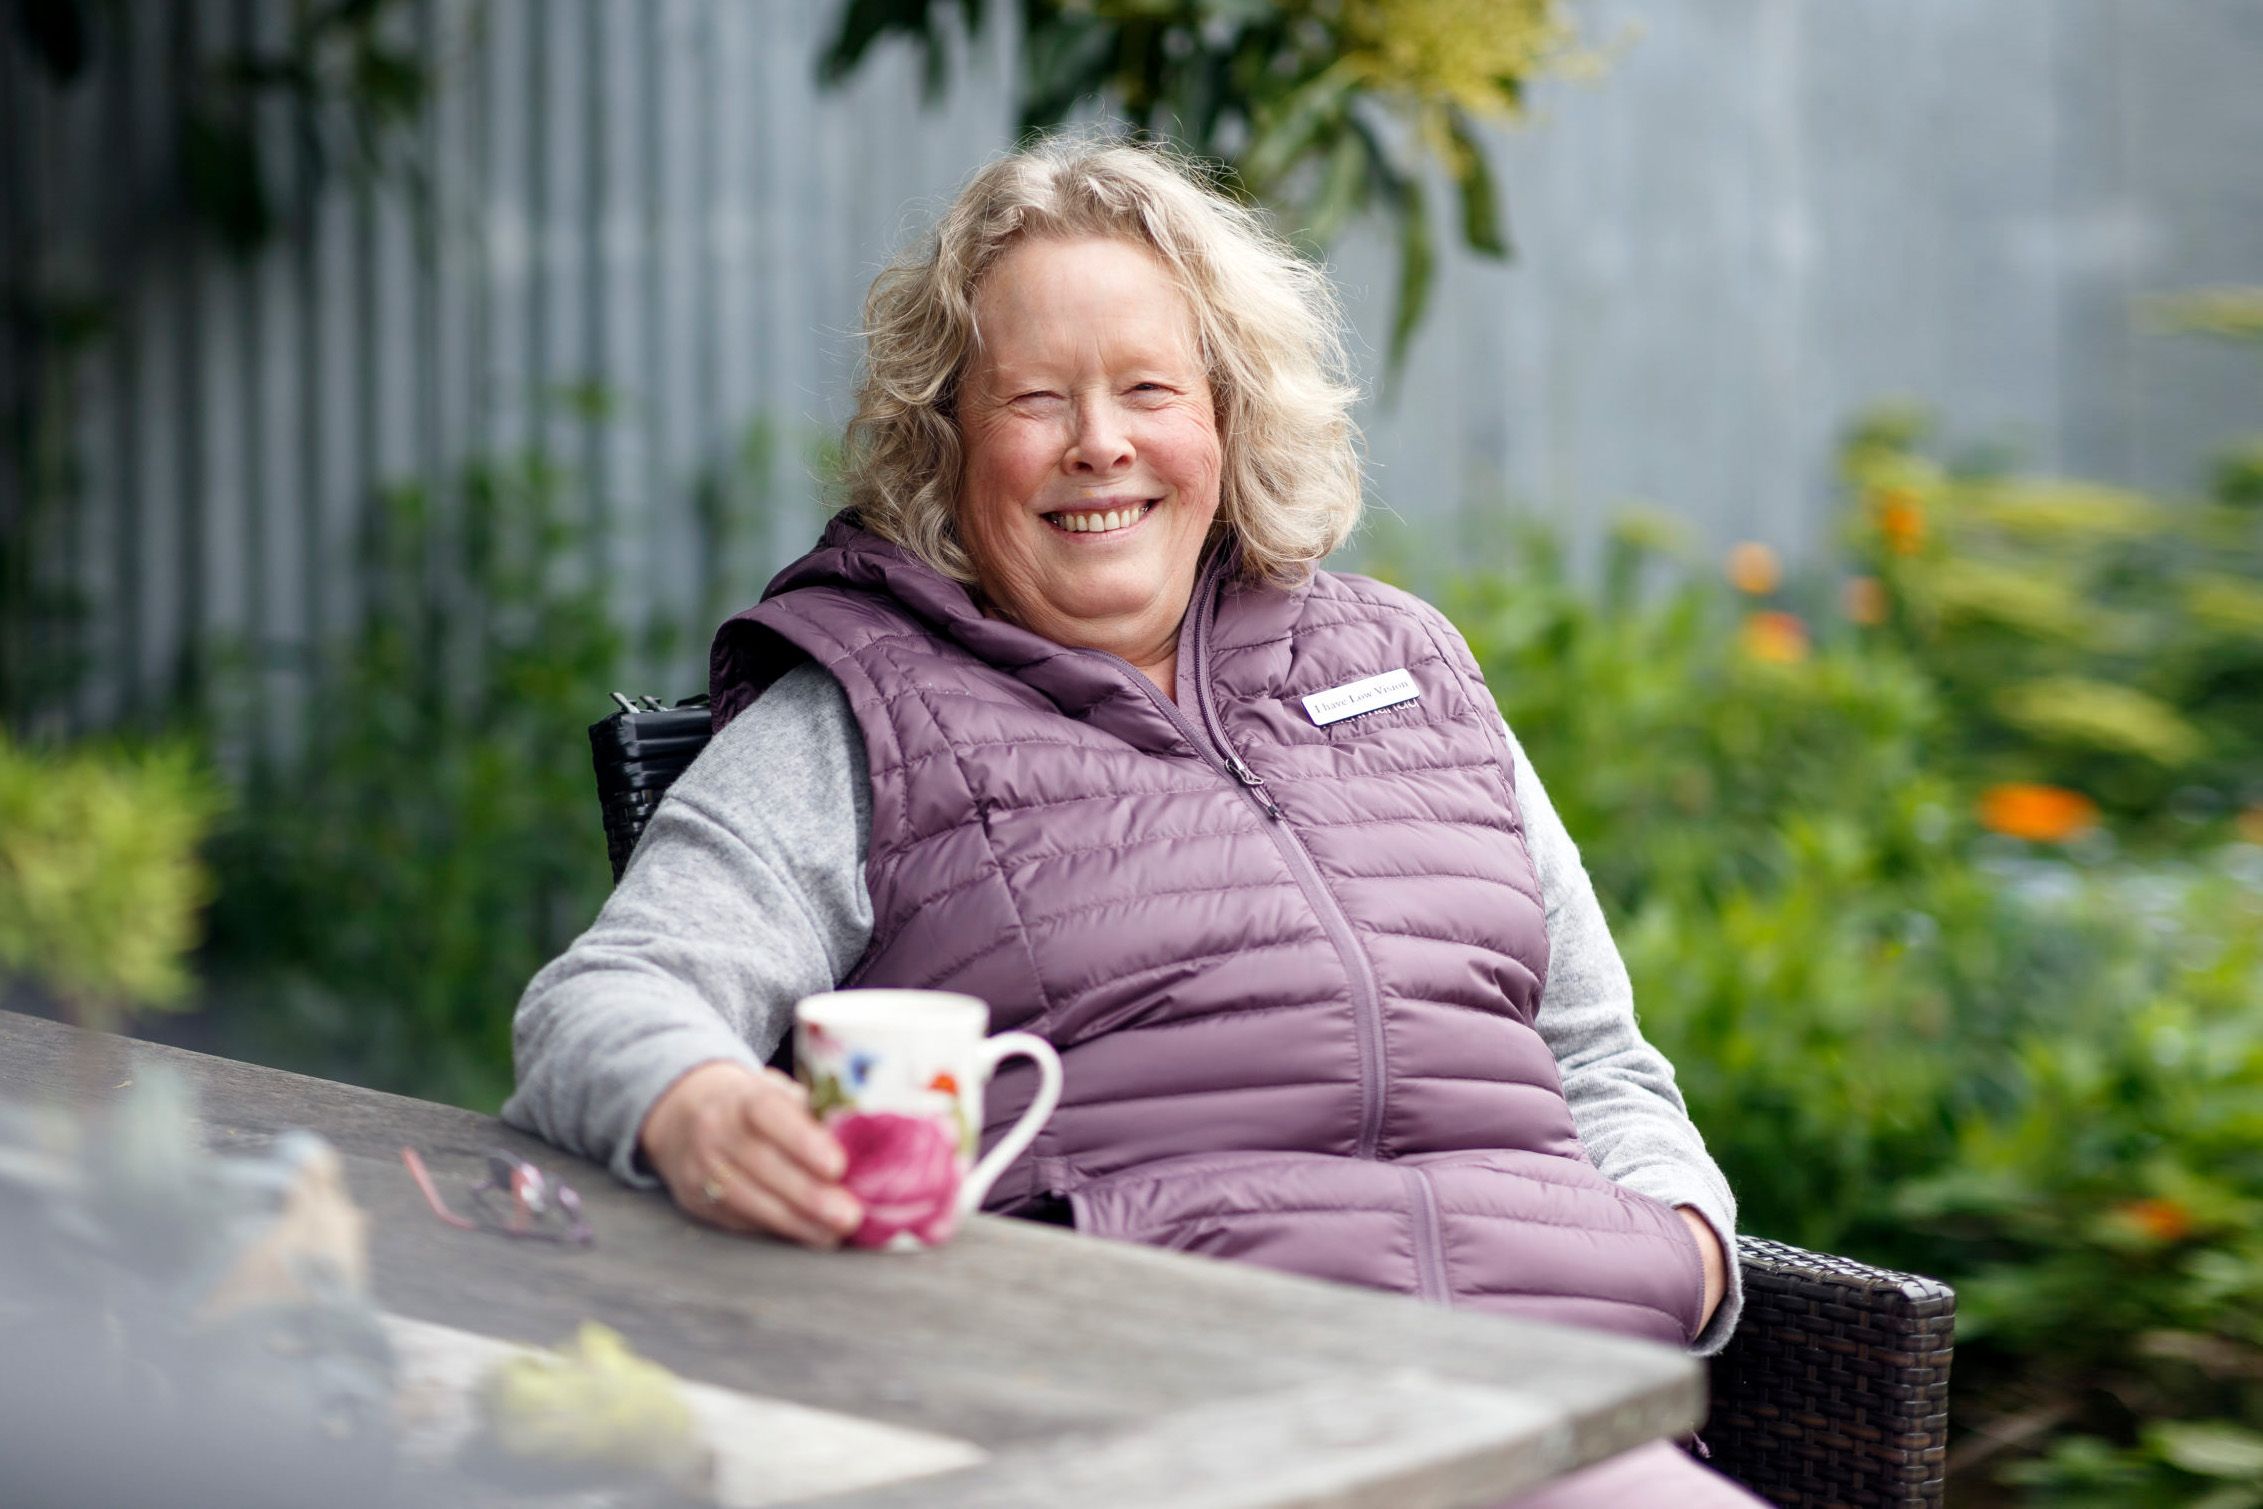 Karen wears a gilet and holds a cup of tea as she sits outside in her garden.